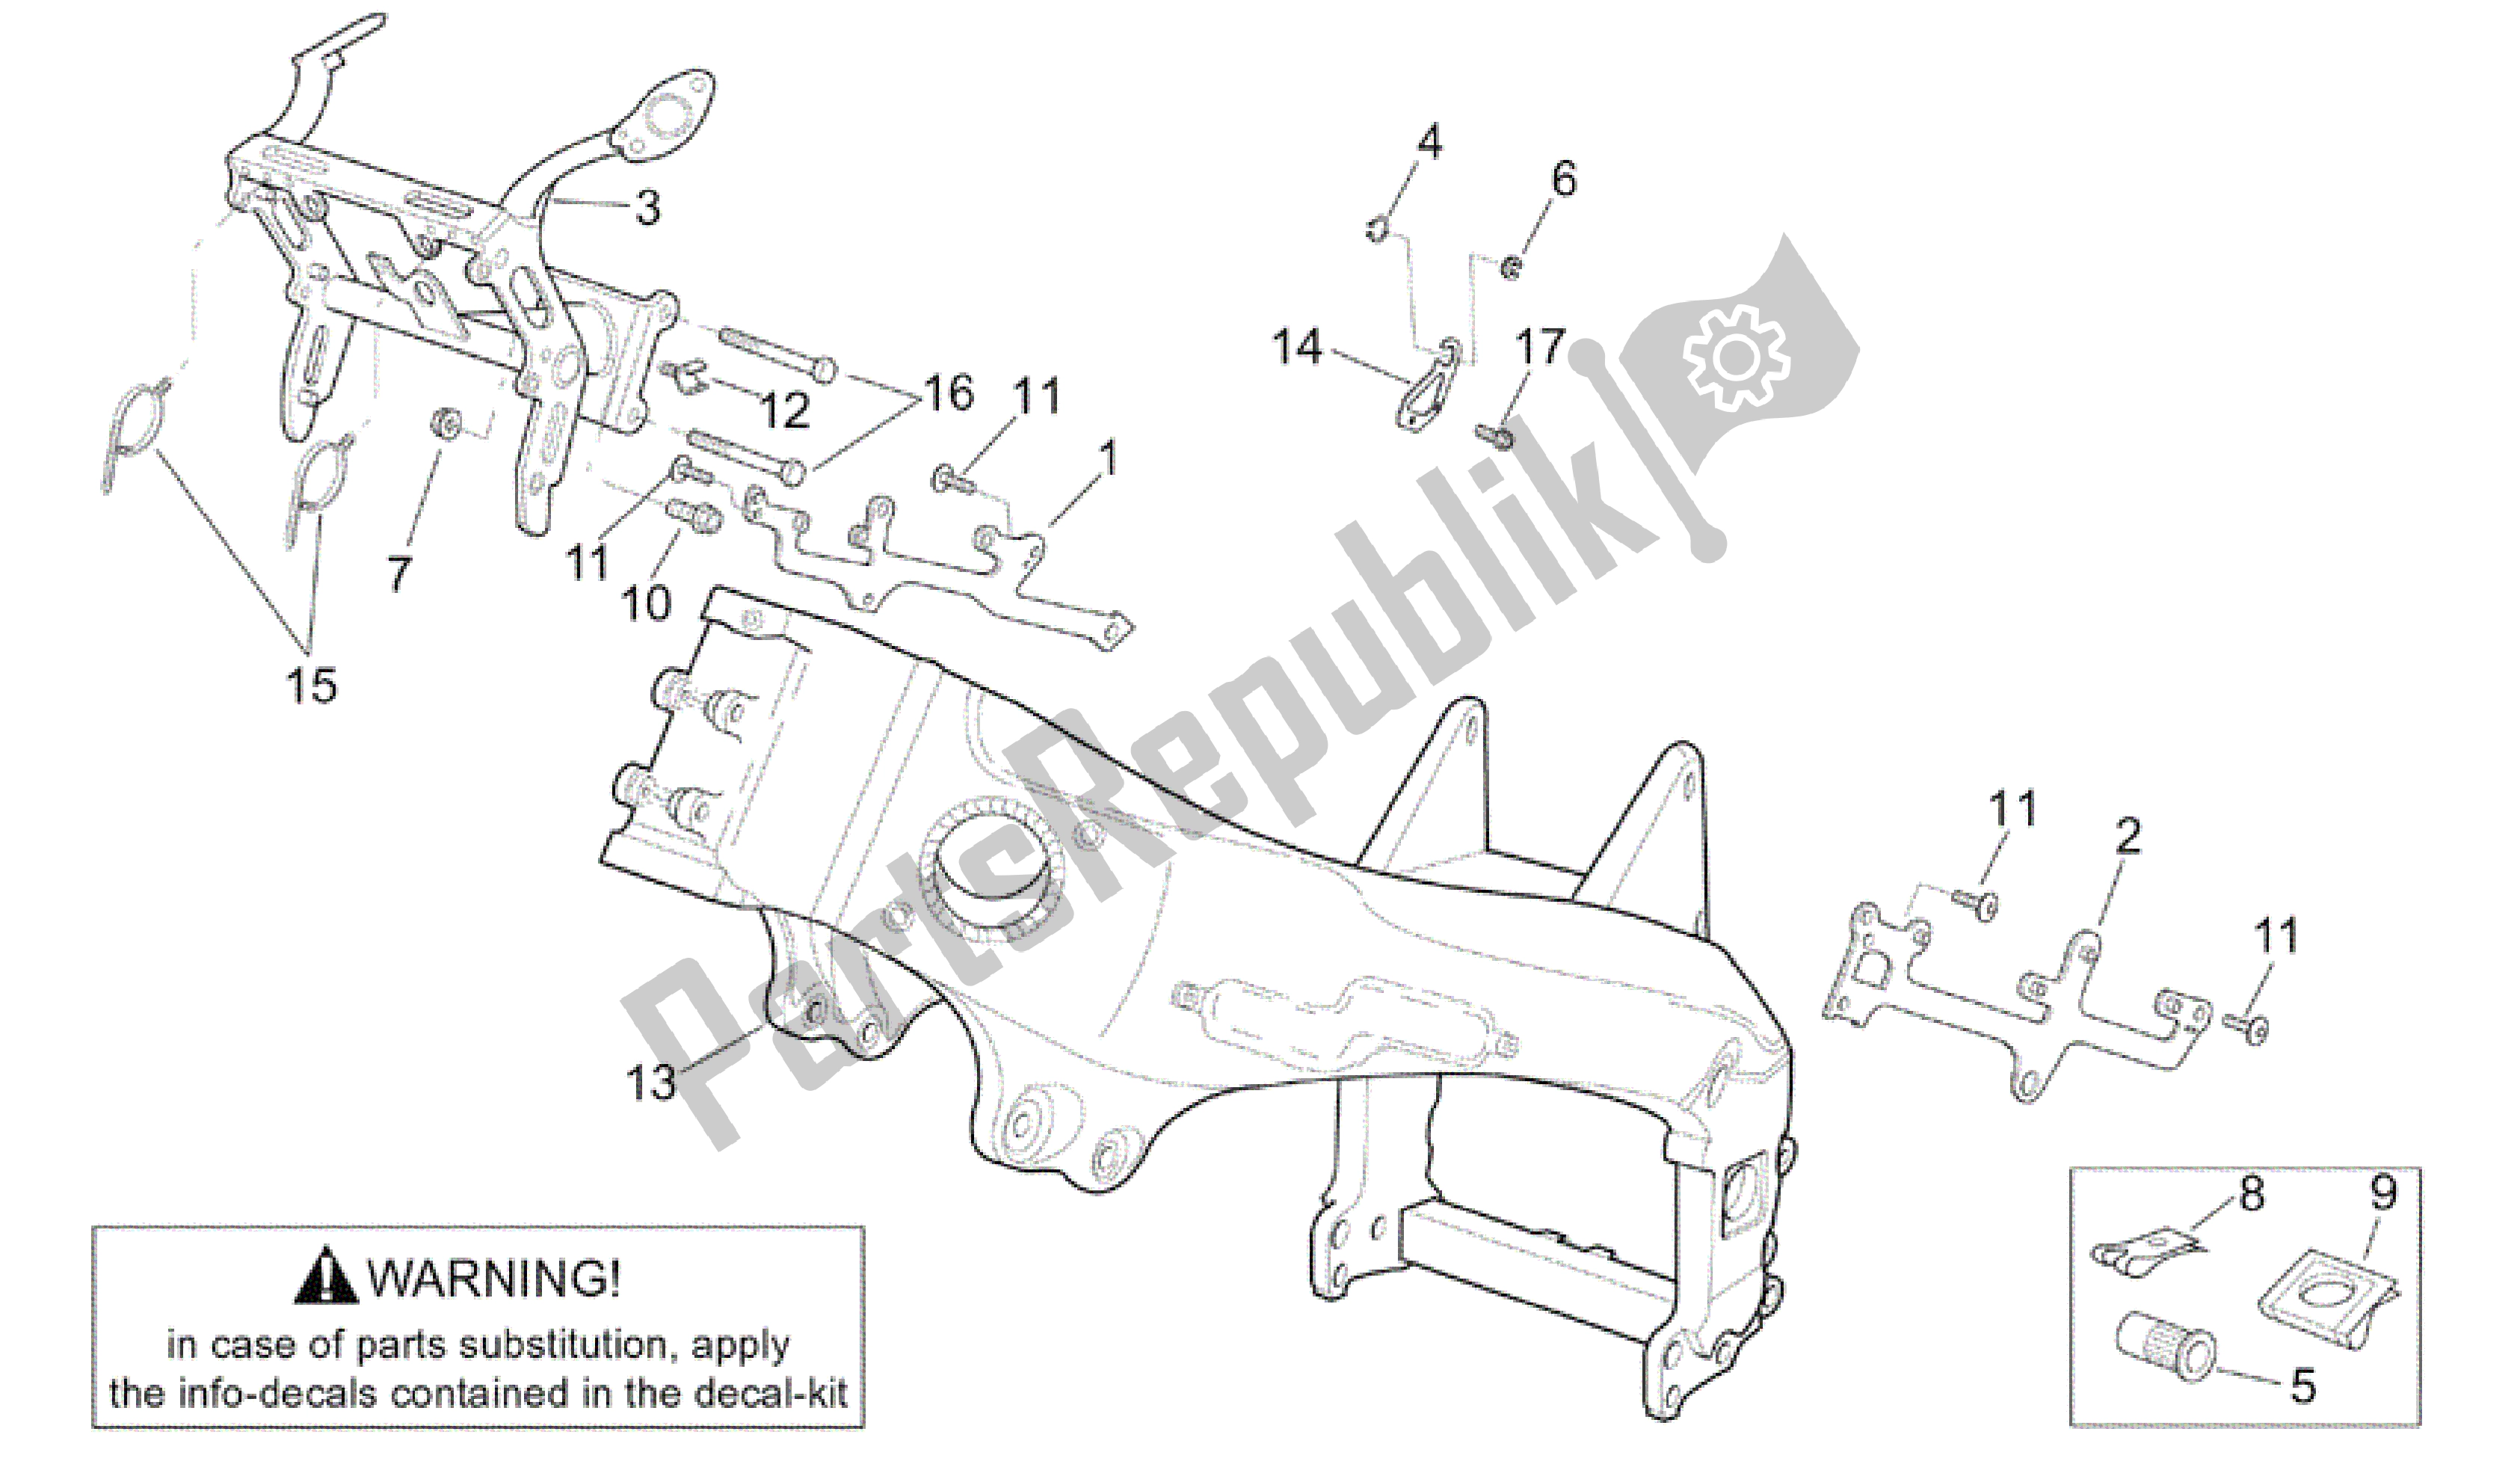 All parts for the Frame Ii of the Aprilia RSV Tuono RS 1000 2004 - 2005